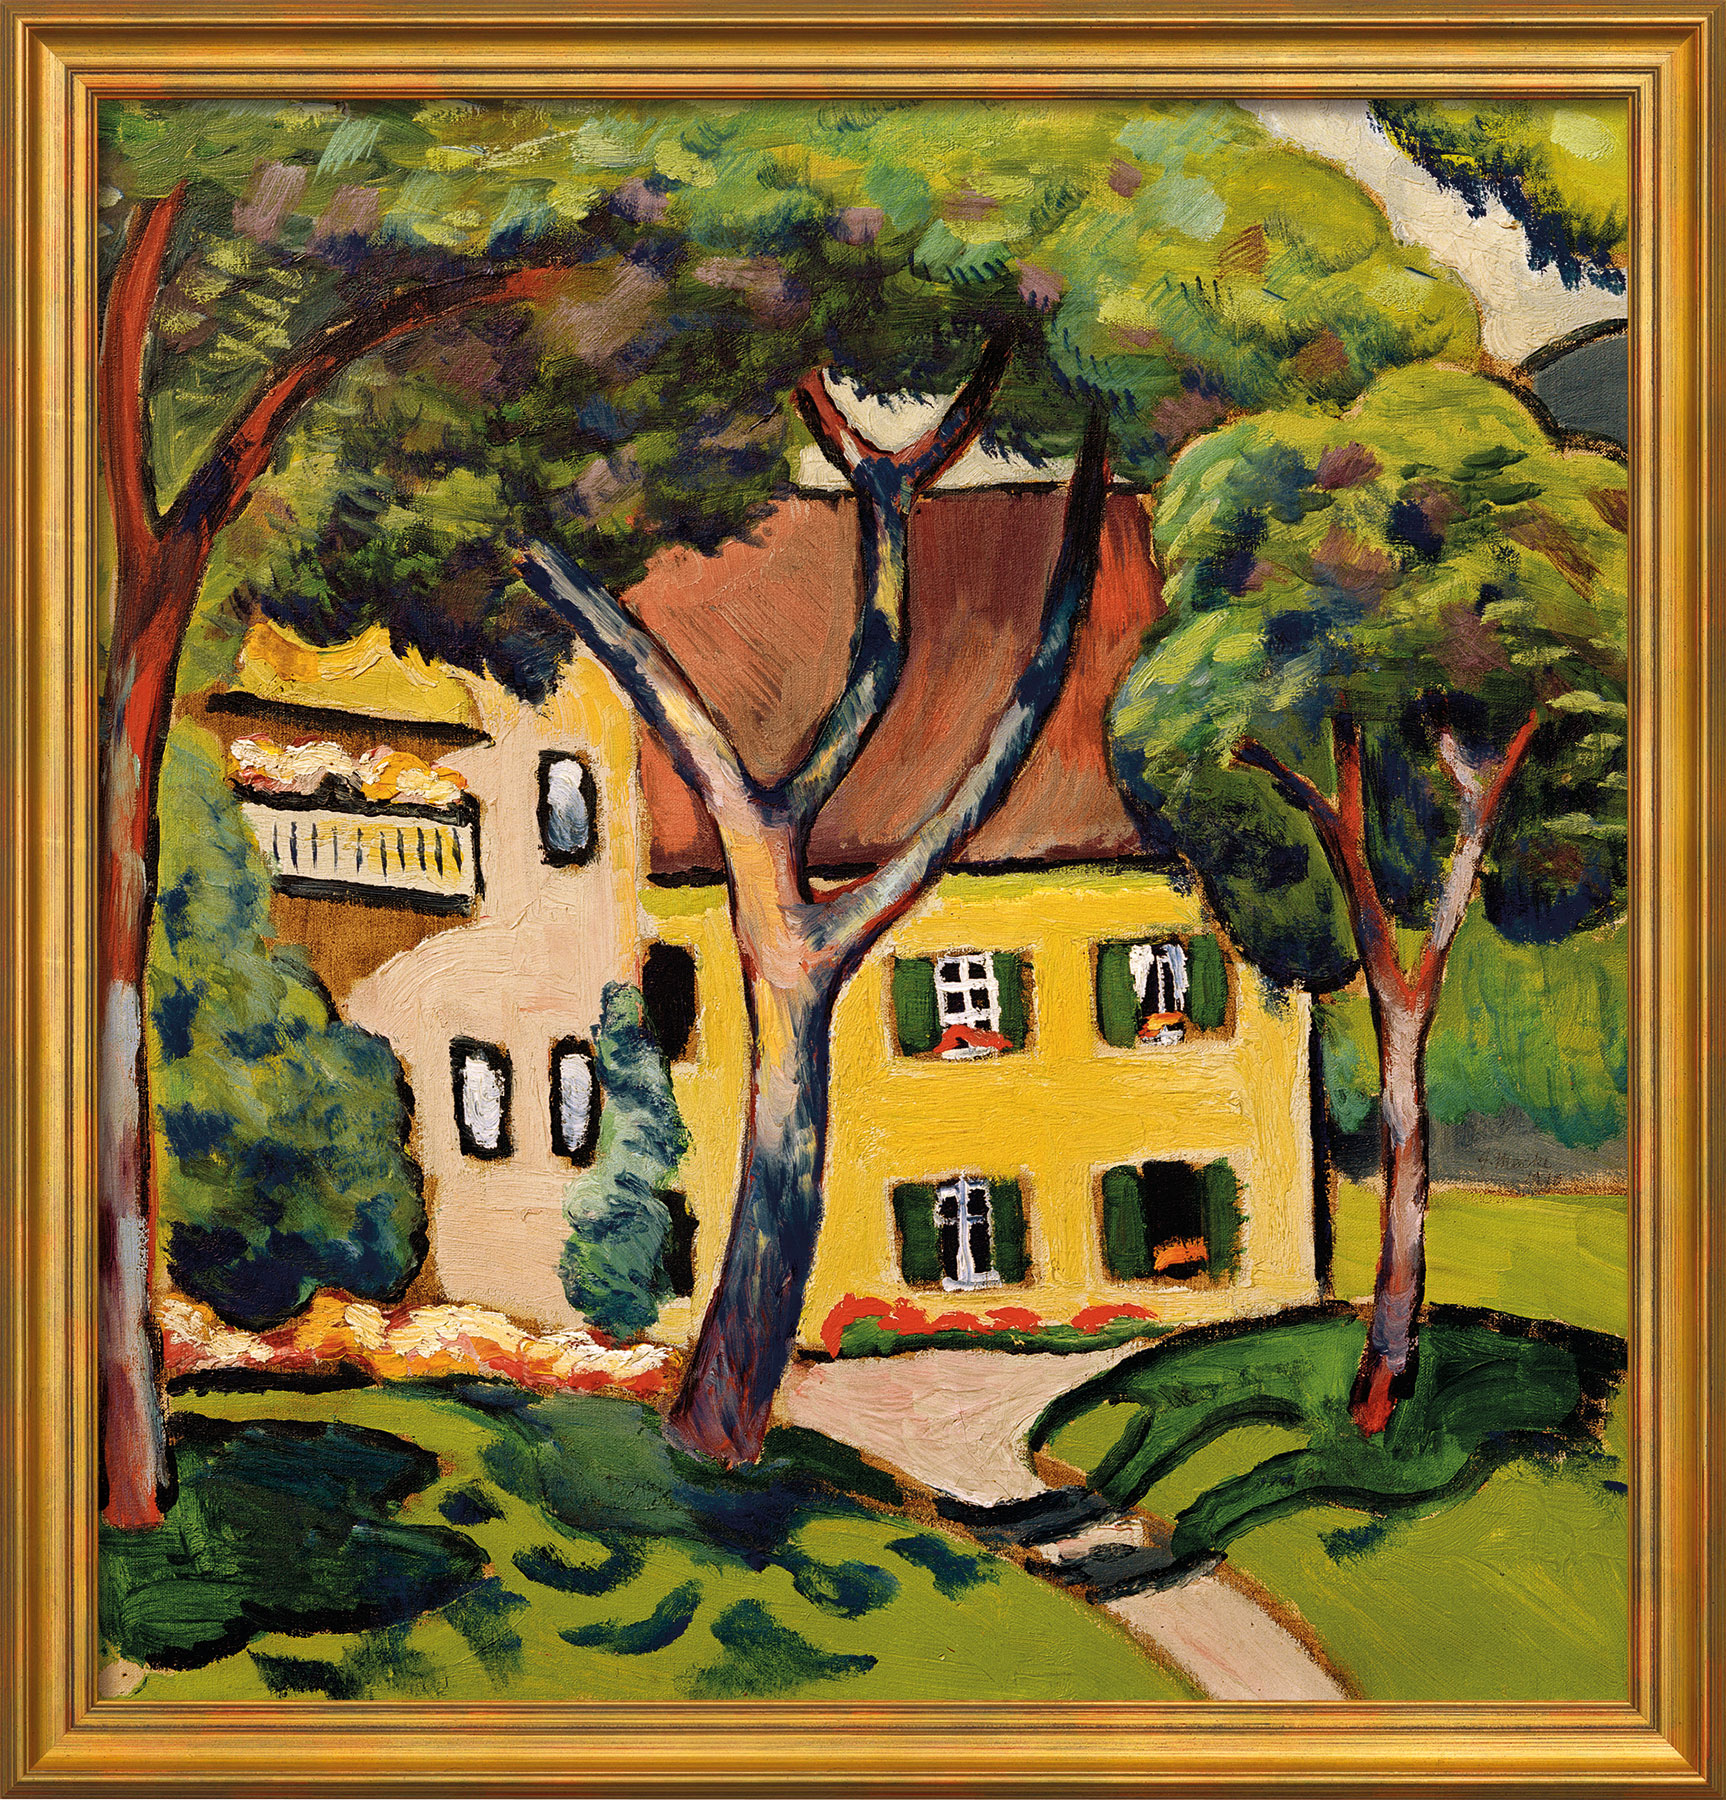 Picture "Staudacher's House at the Tegernsee" (1910), golden framed version by August Macke